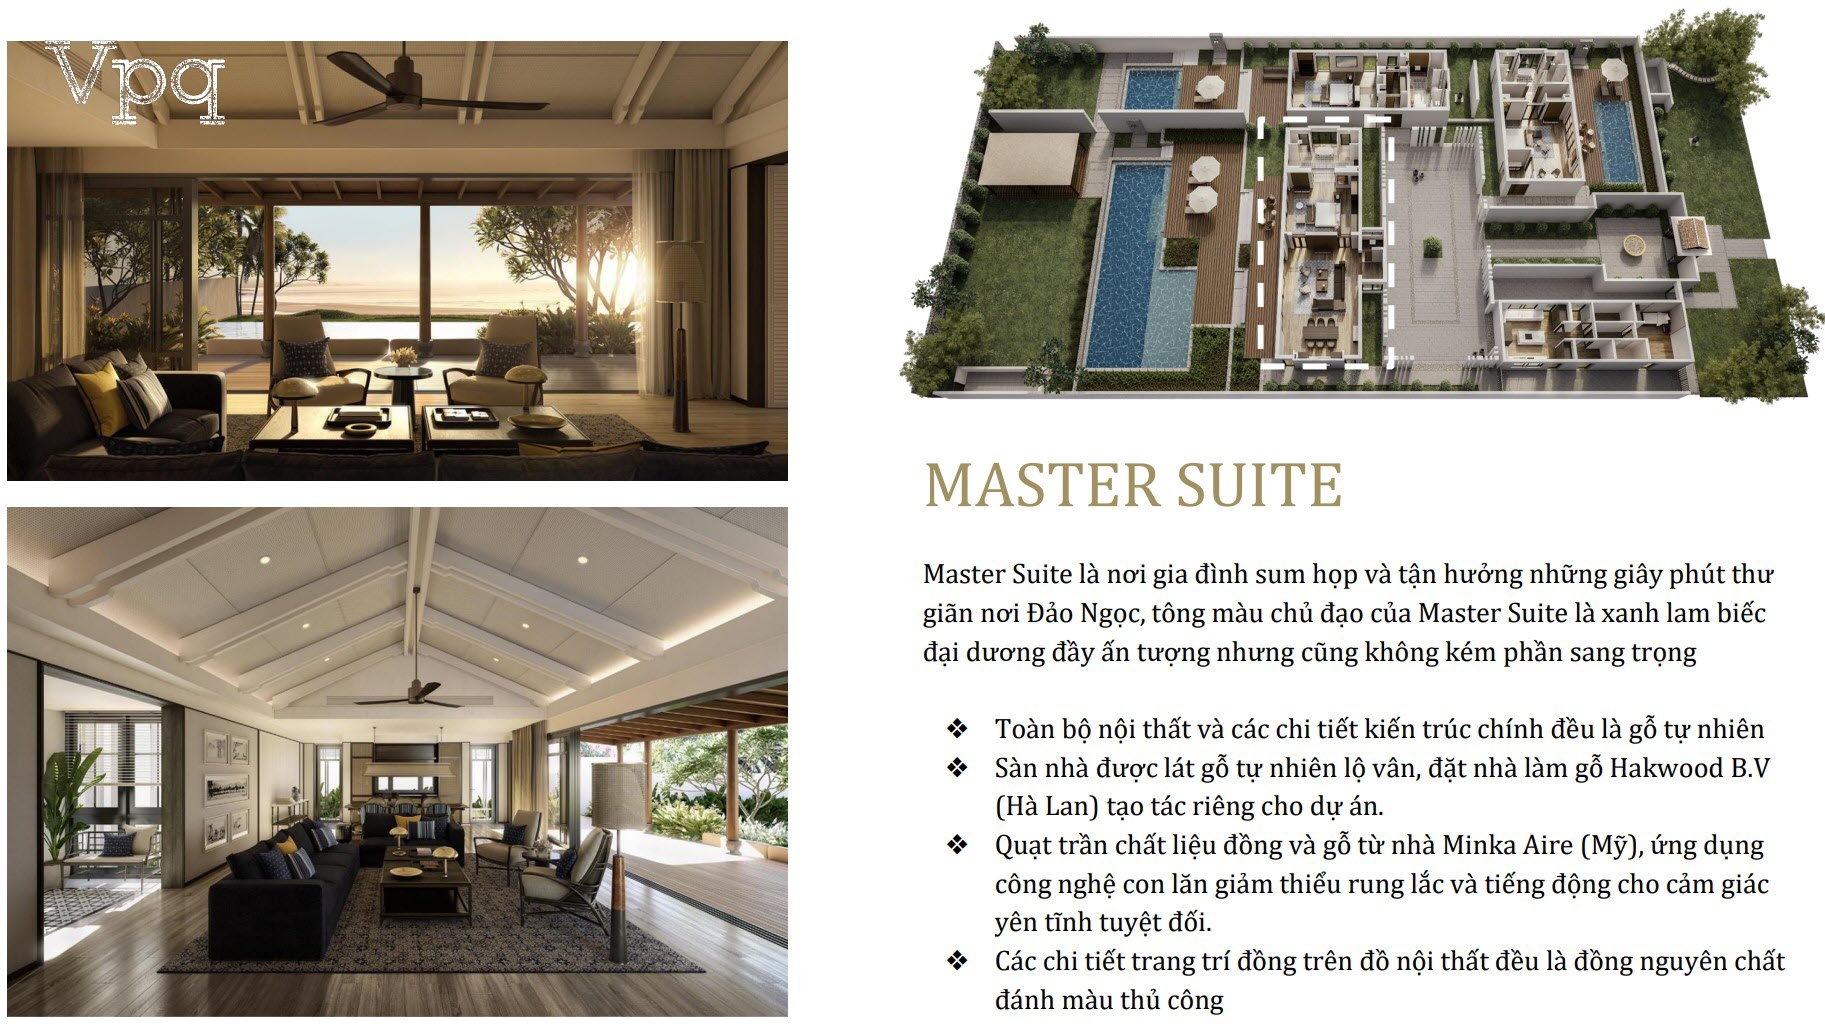 Nội thất phòng Master Suite